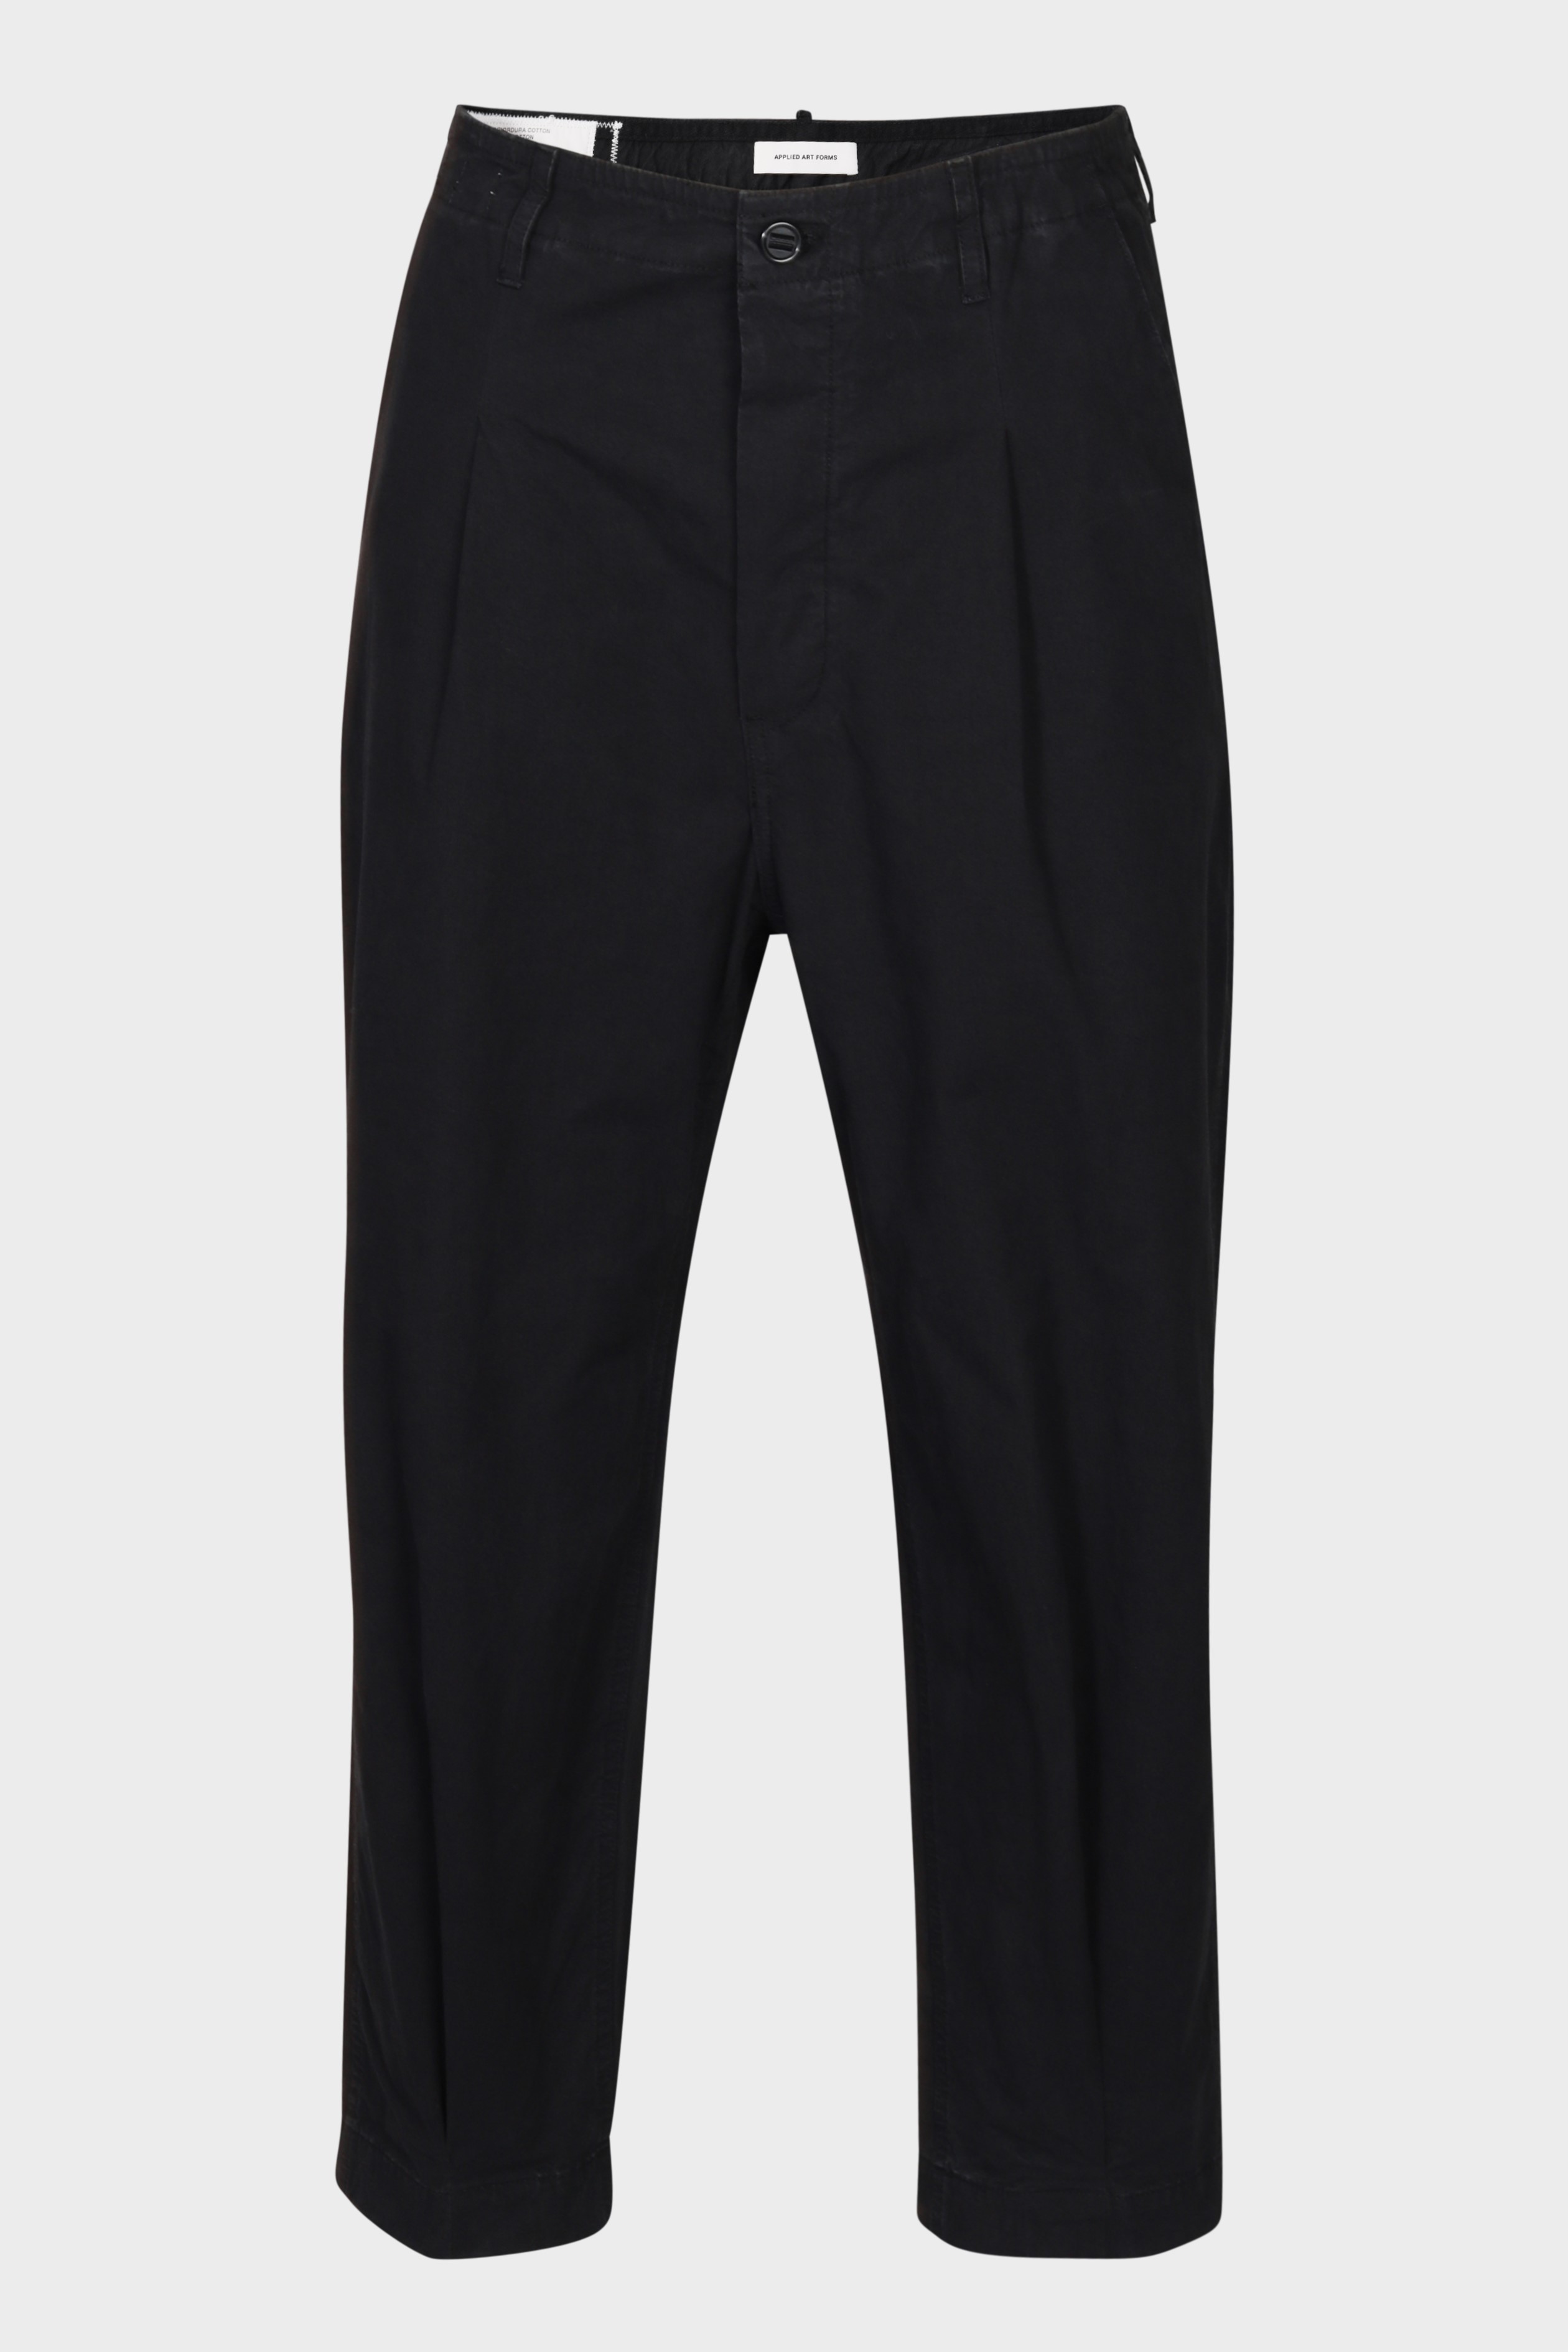 APPLIED ART FORMS Japanese Cargo Pant in Black XL